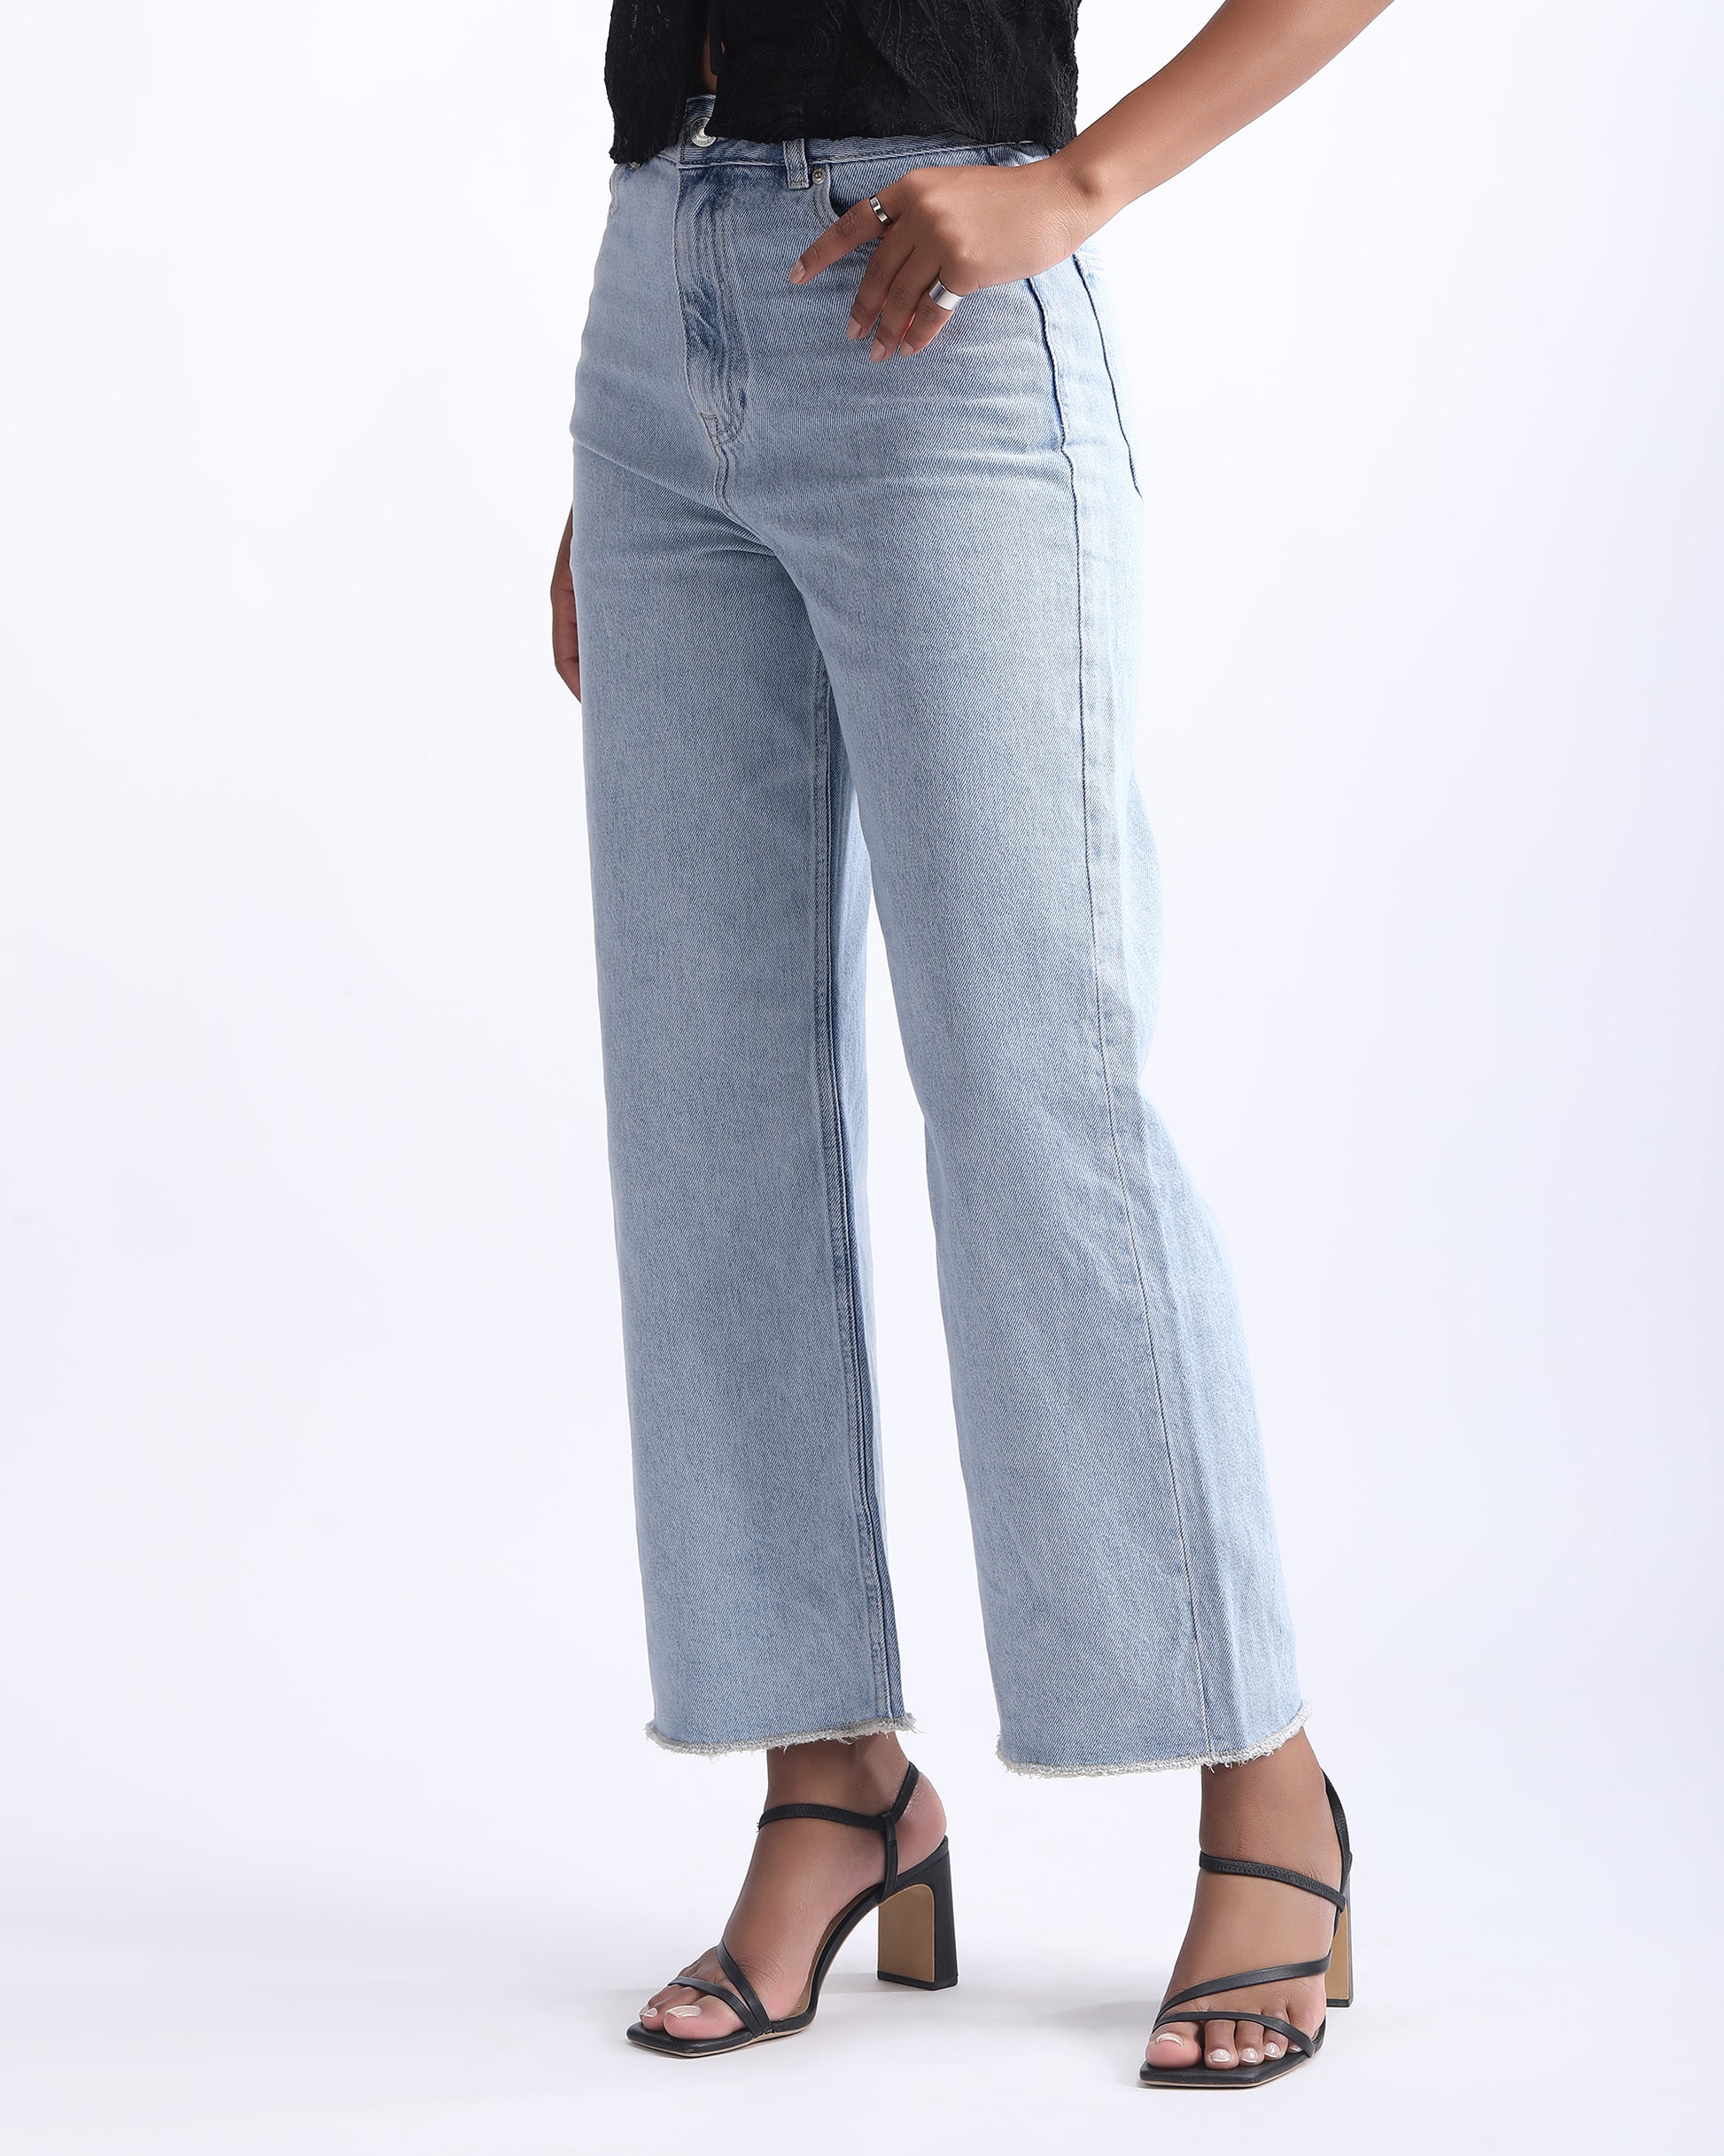 WIDE LEG BLUE JEANS,blue, bottomwear, denim, frayed hem, full length, high rise, high waist, icy blue, jeans, light blue, washed jeans, wide leg,wide-leg-blue-jeans,Length - Full length Waist - High-rise waist Fit - Wide leg fit Color - BlueNo. of Pockets - 4Material - DenimLength - 40 inchClosure - Zip &amp; buttonDetail - Washed effect